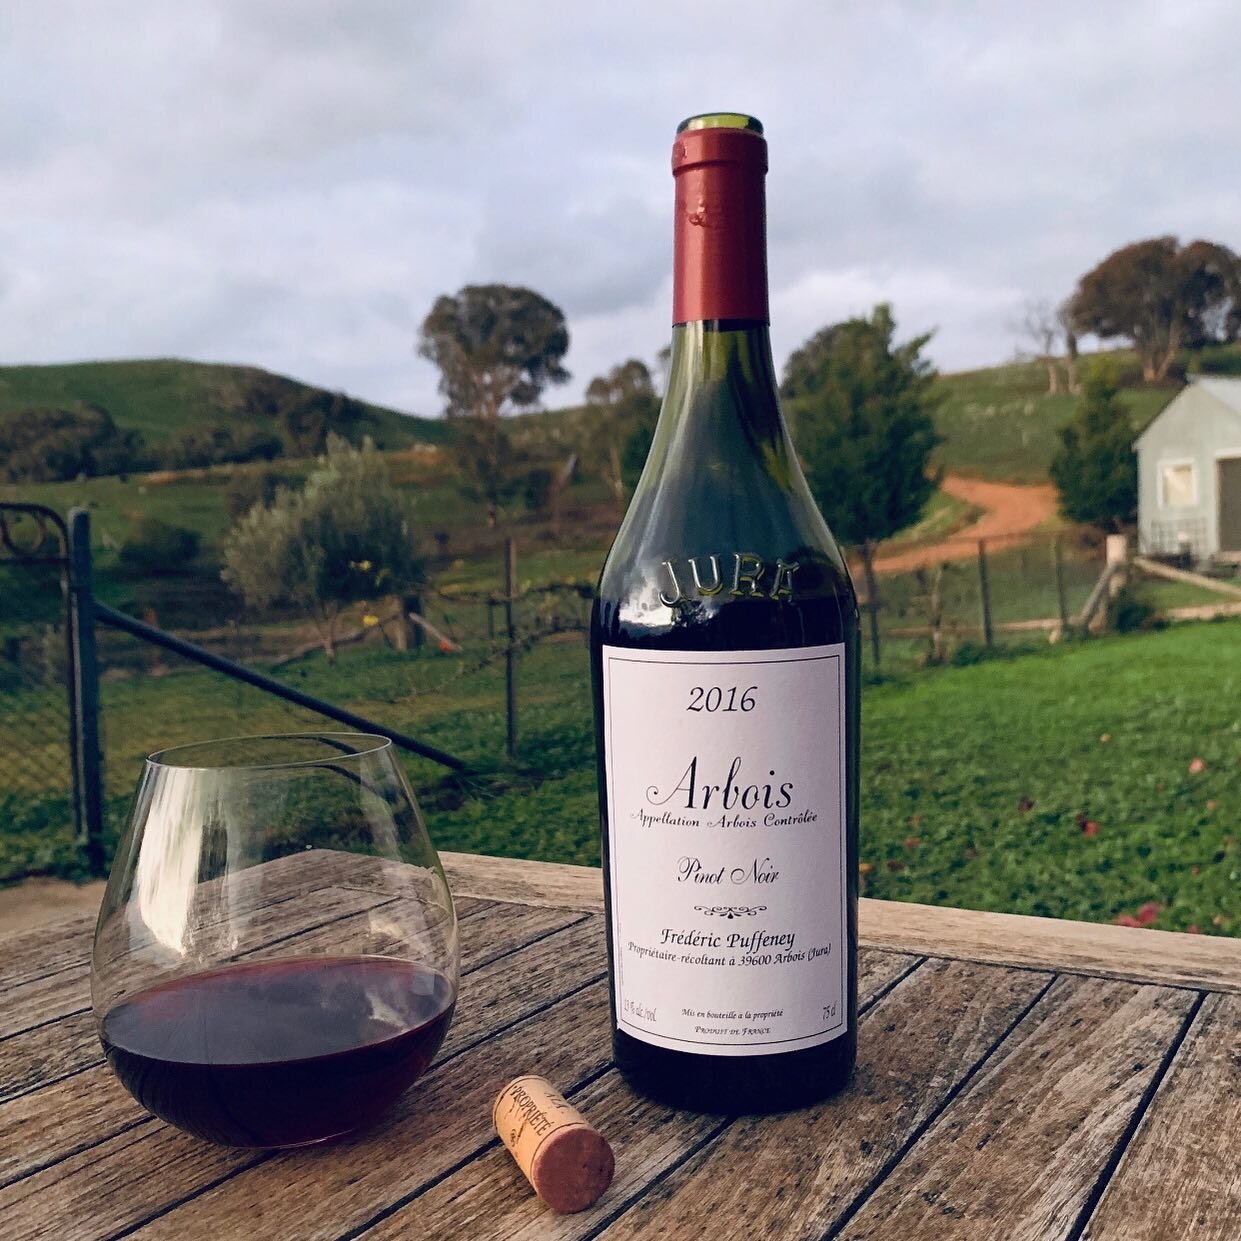 You can taste the farm in this amazing Pinot! Thanks Bibo Wine Bar for delivering to isolation! #bibowinebar#fredericpuffeney #pinotnoir#southern tablelands